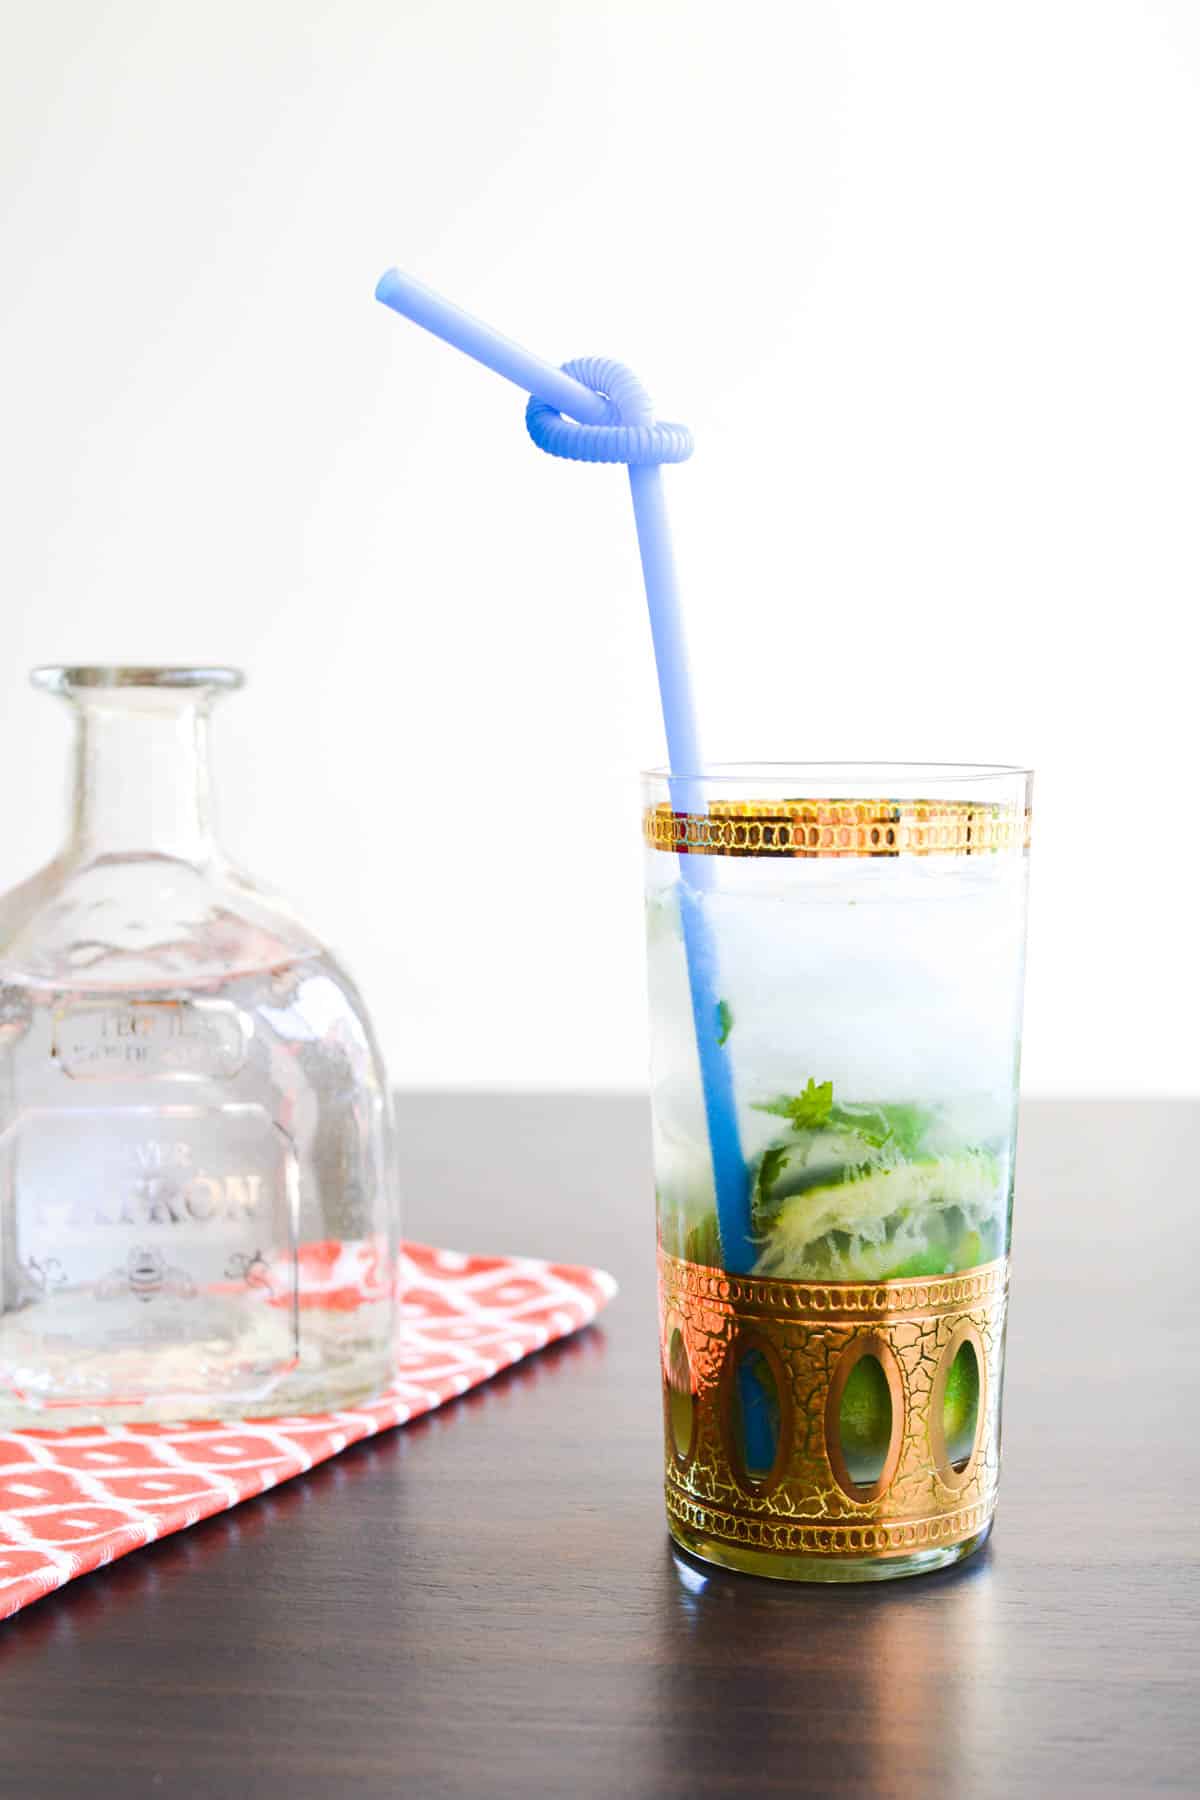 A cocktail glass with gold accents and a blue straw on a table next to a bottle of Patron tequila.